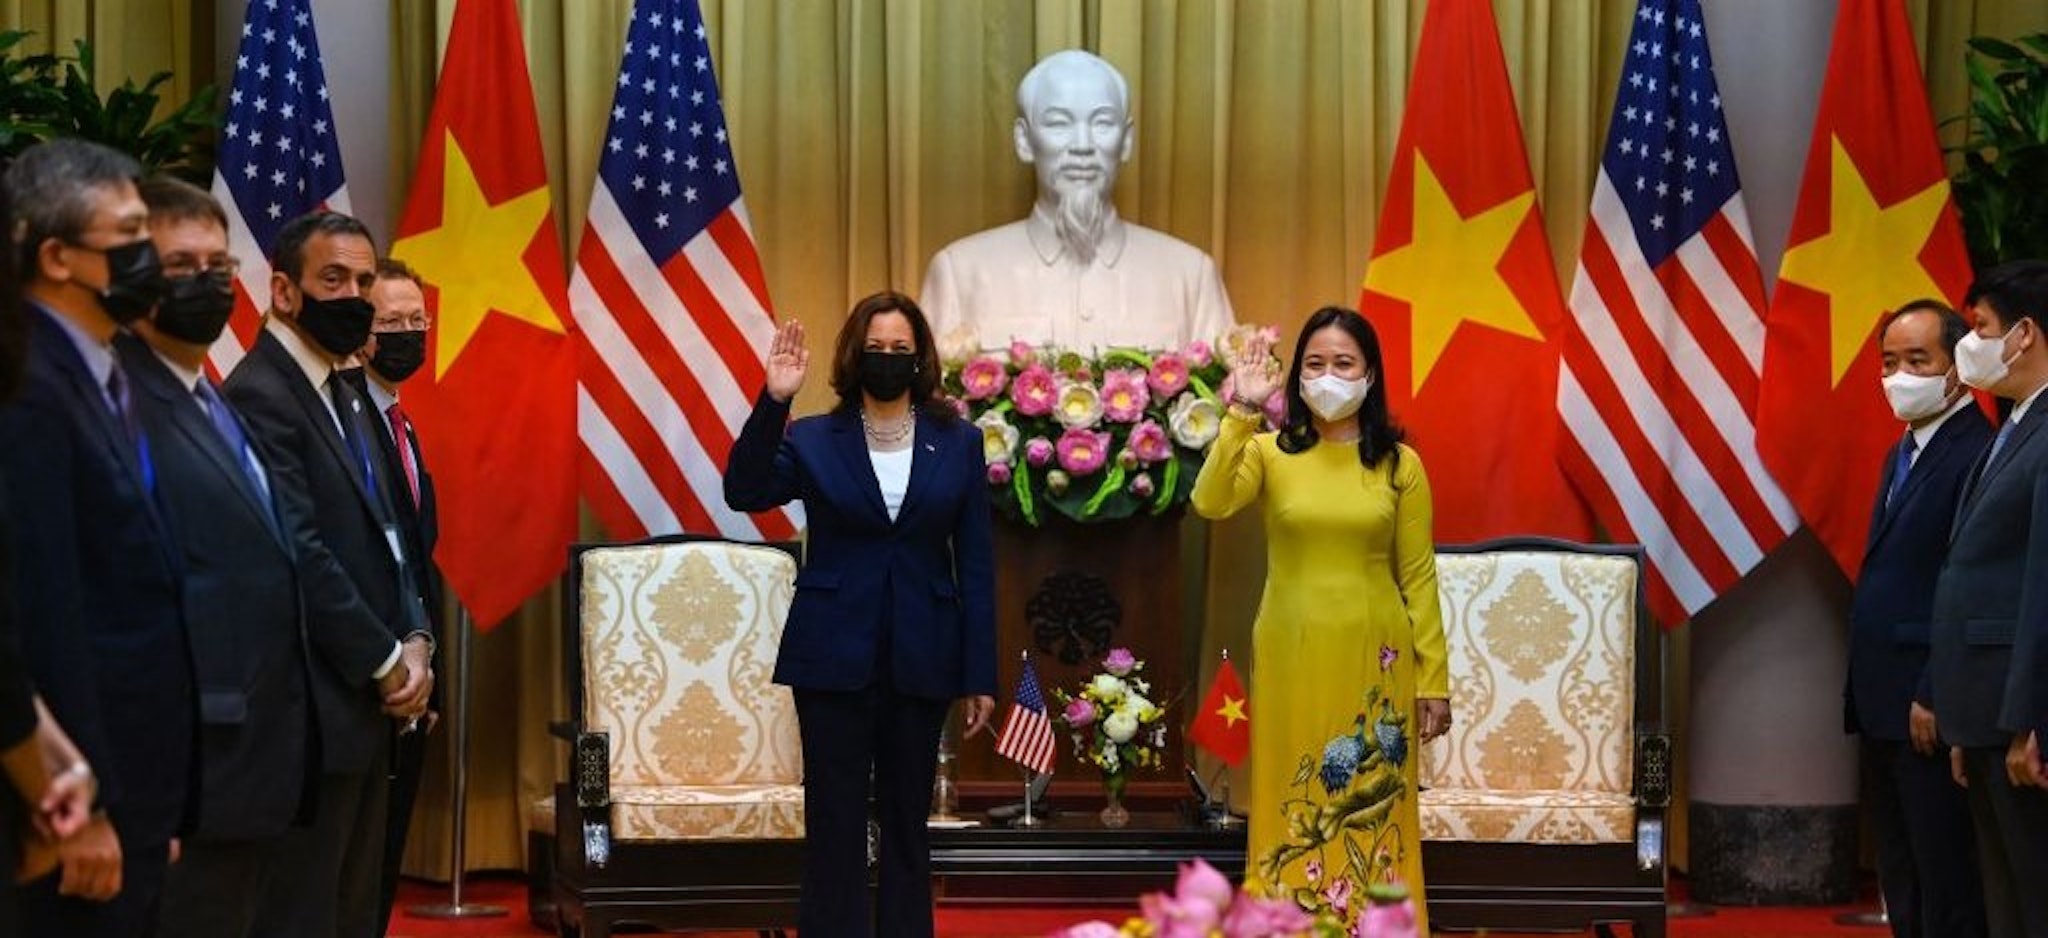 US Vice President Kamala Harris (L) waves beside Vietnam's Vice President Vo Thi Anh Xuan at the Presidential Palace in Hanoi on August 25, 2021. (Photo by Manan VATSYAYANA / POOL / AFP) (Photo by